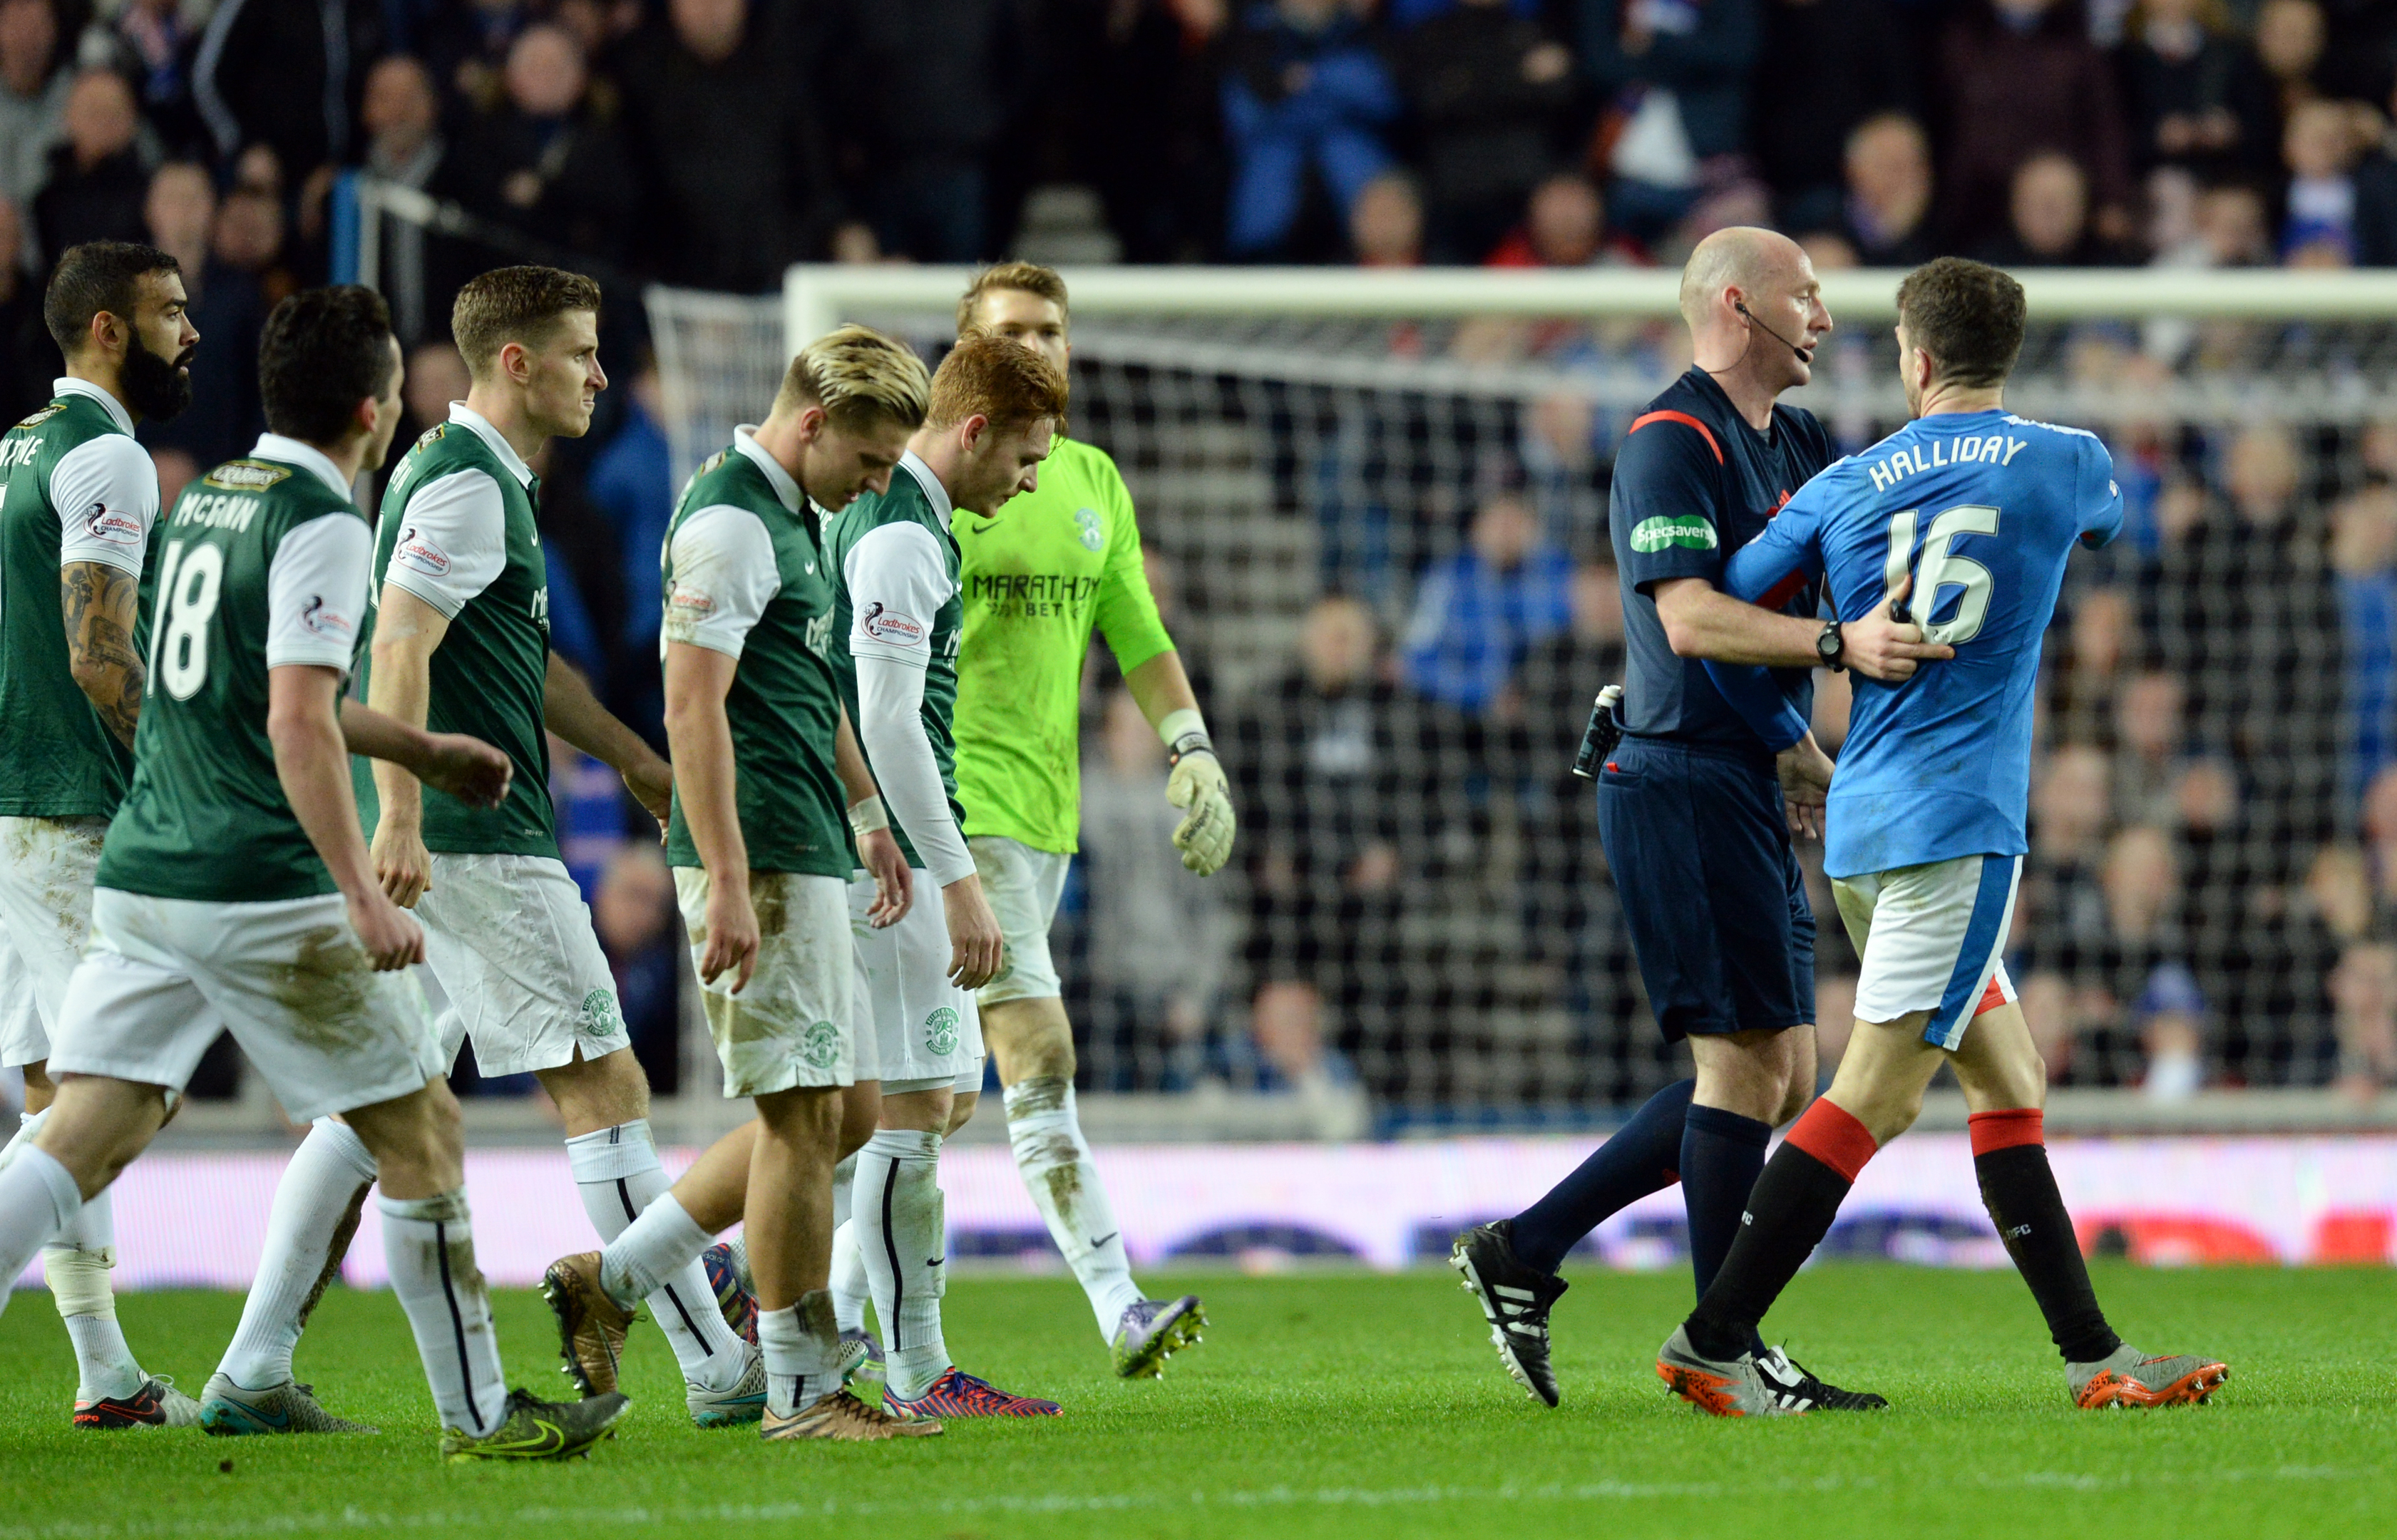 Rangers' Andy Halliday (right) is sent off in the match against Hibs last month (SNS Group)